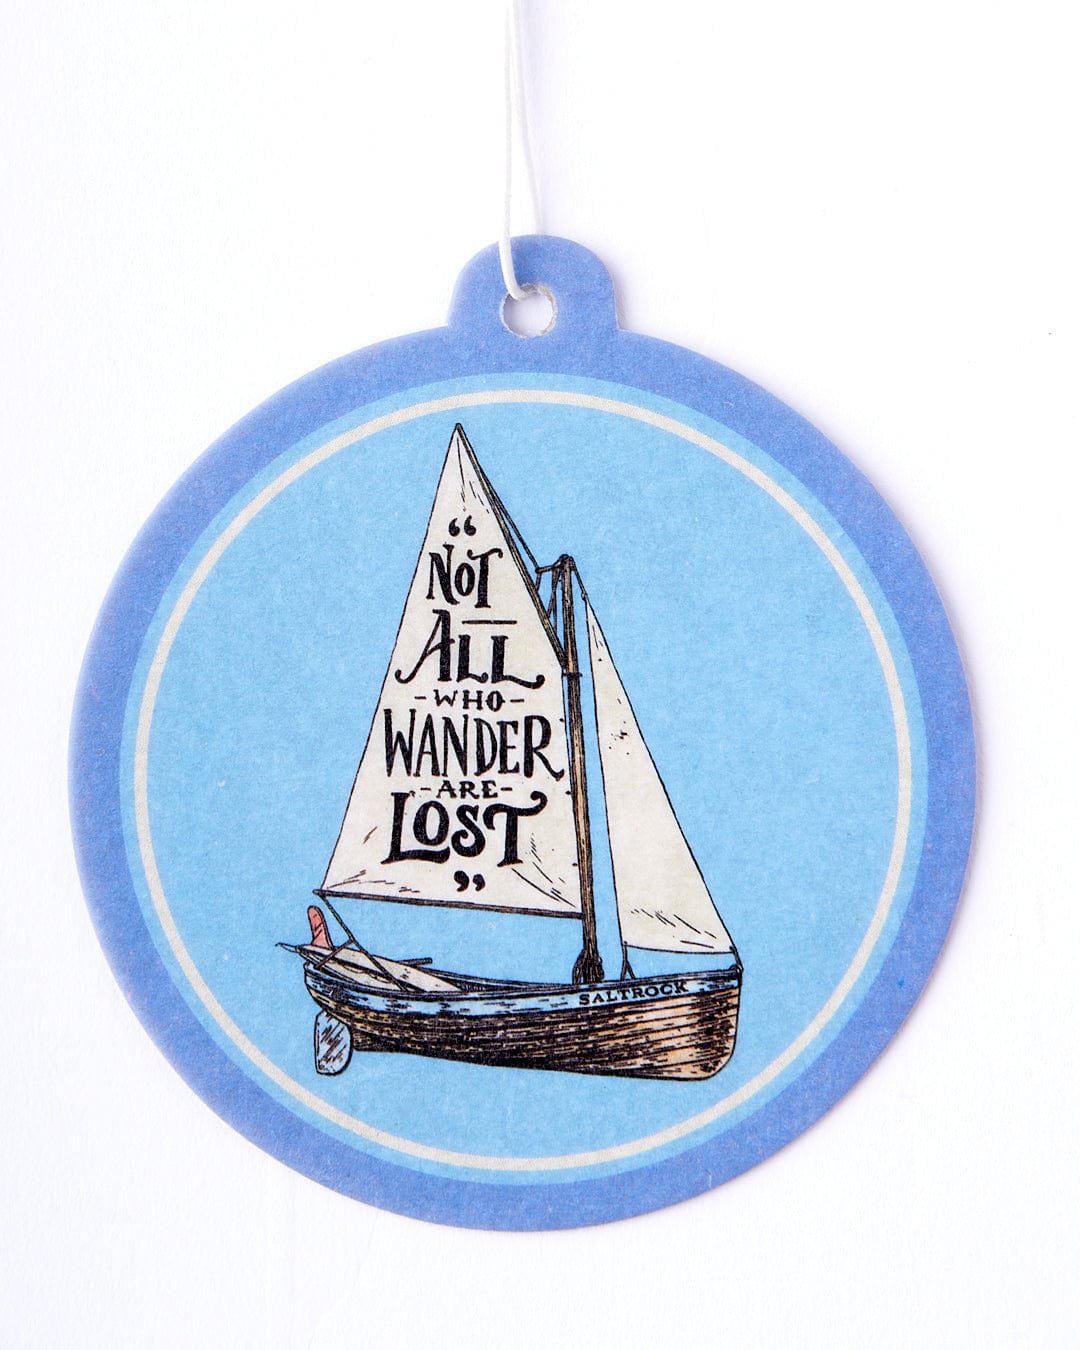 A Lost Ships - Air Freshener - Blue ornament with a sailboat on it, by Saltrock.